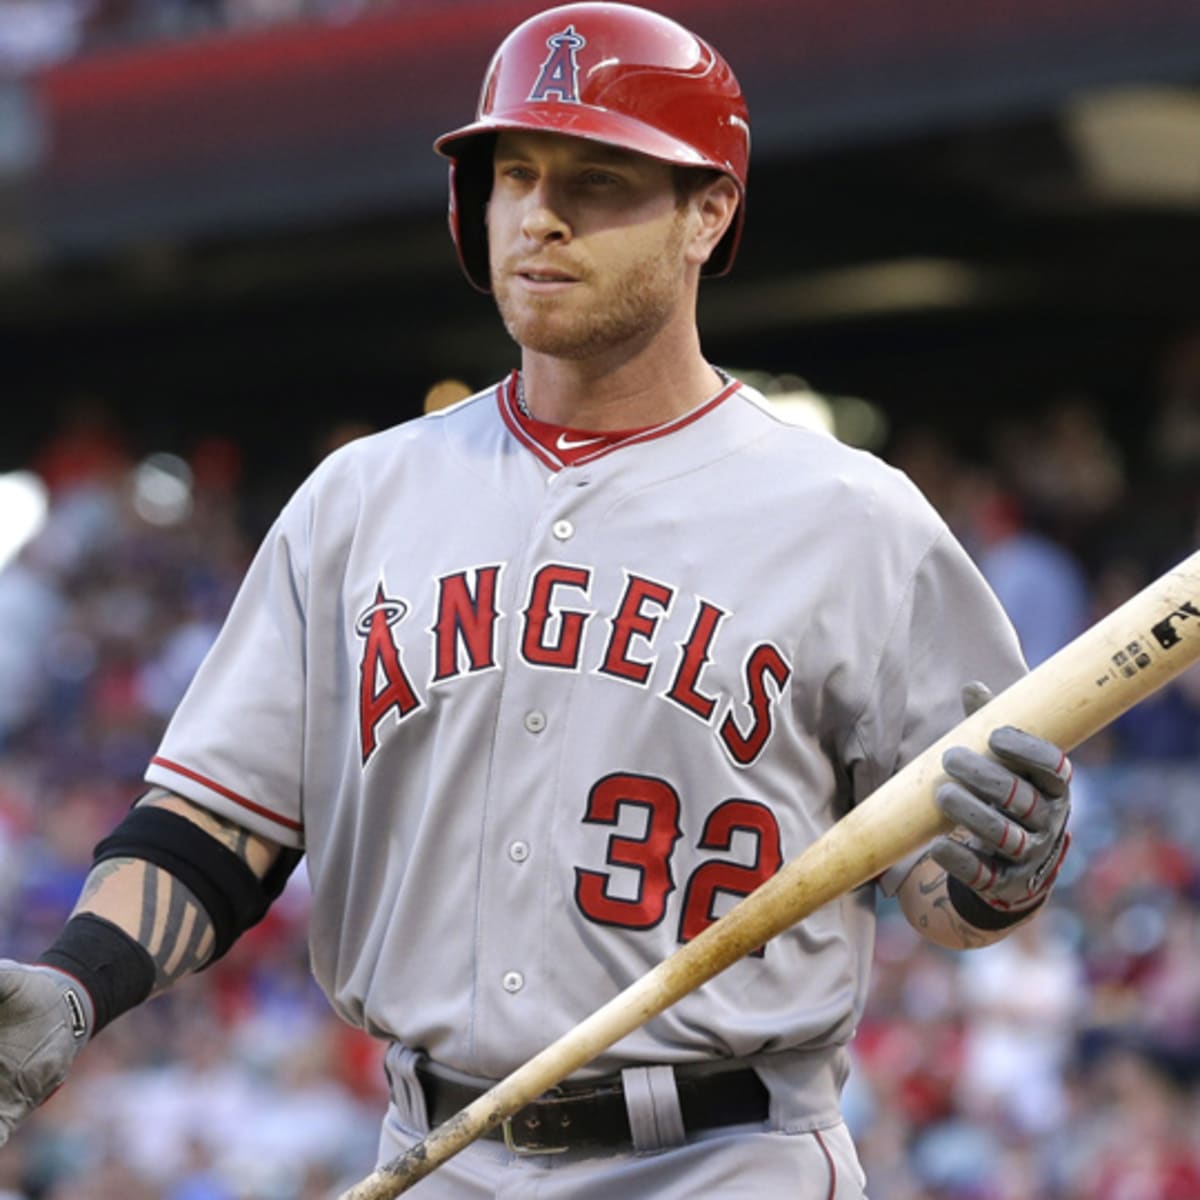 This is probably the end of the line for Josh Hamilton's career